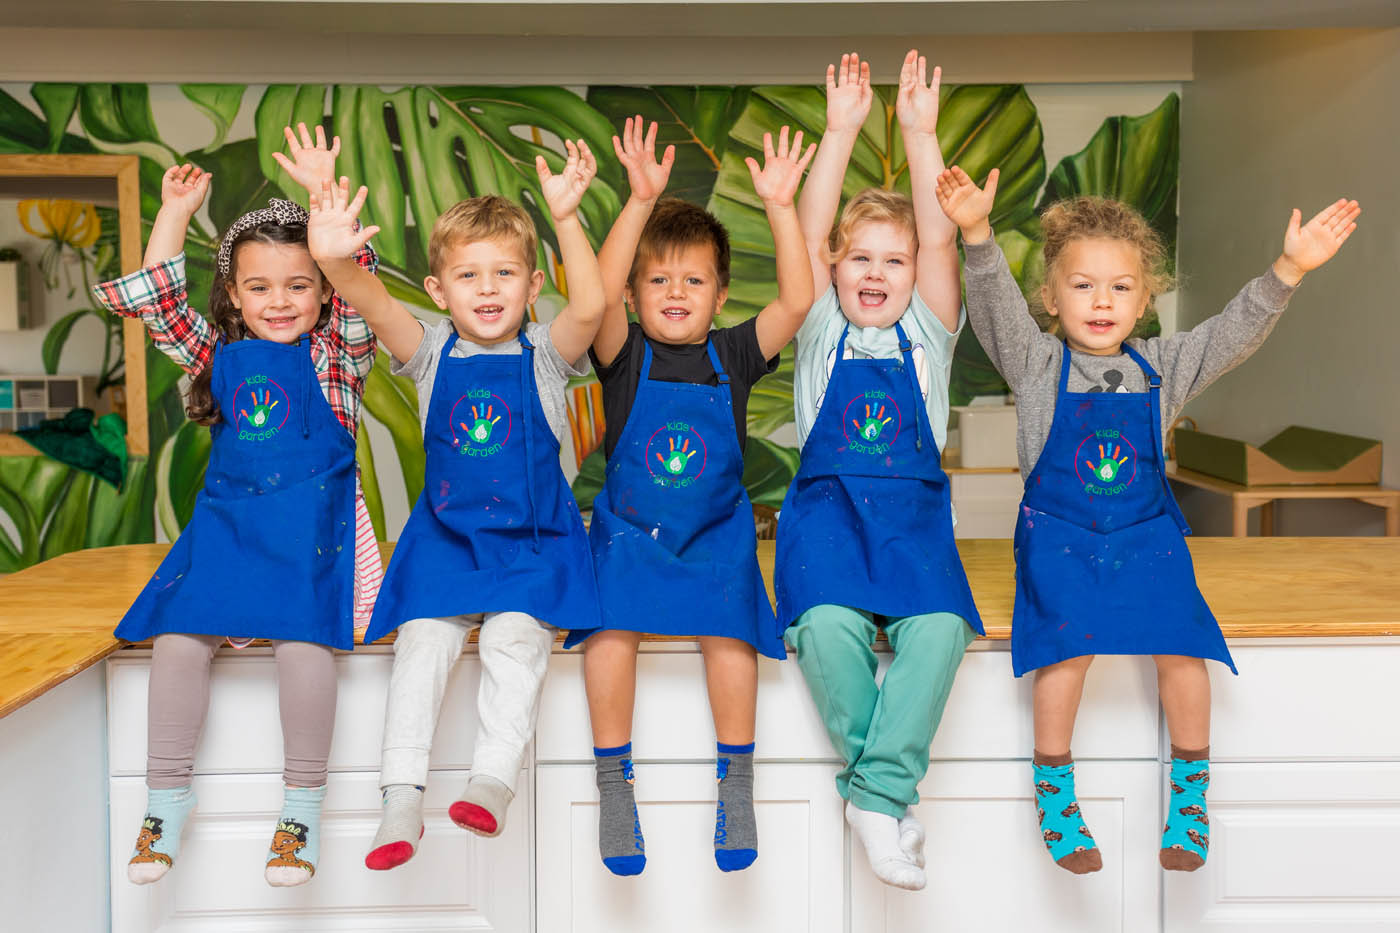 Kids in blue aprons at Kids Garden Steamboat Springs learning center.